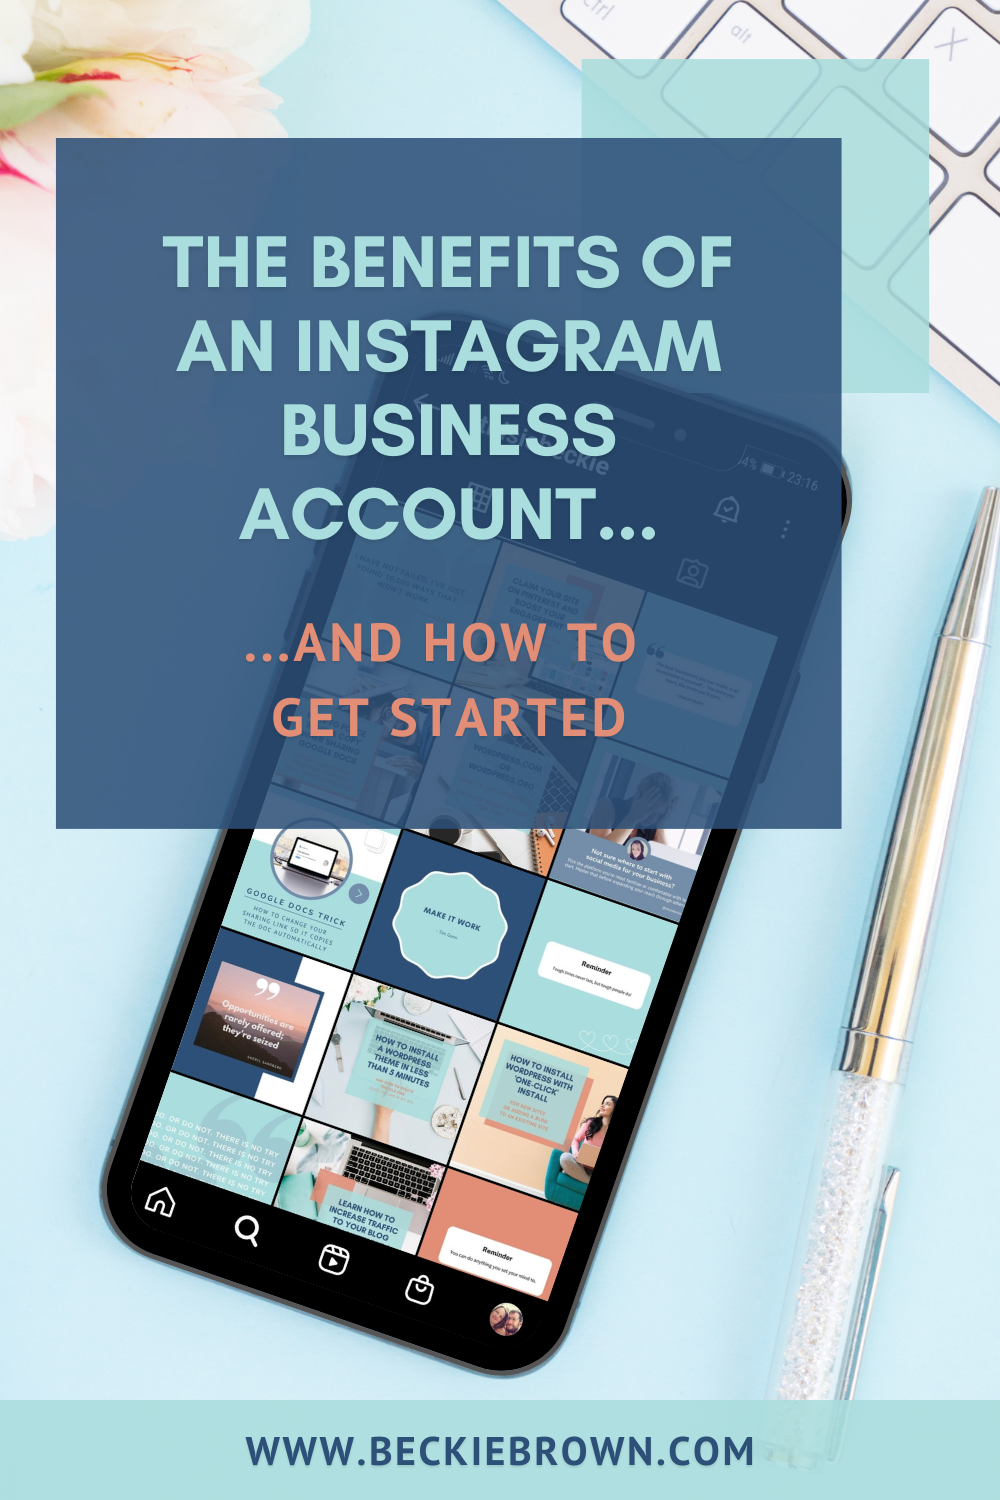 Pin Image: Instagram Business Account Benefits